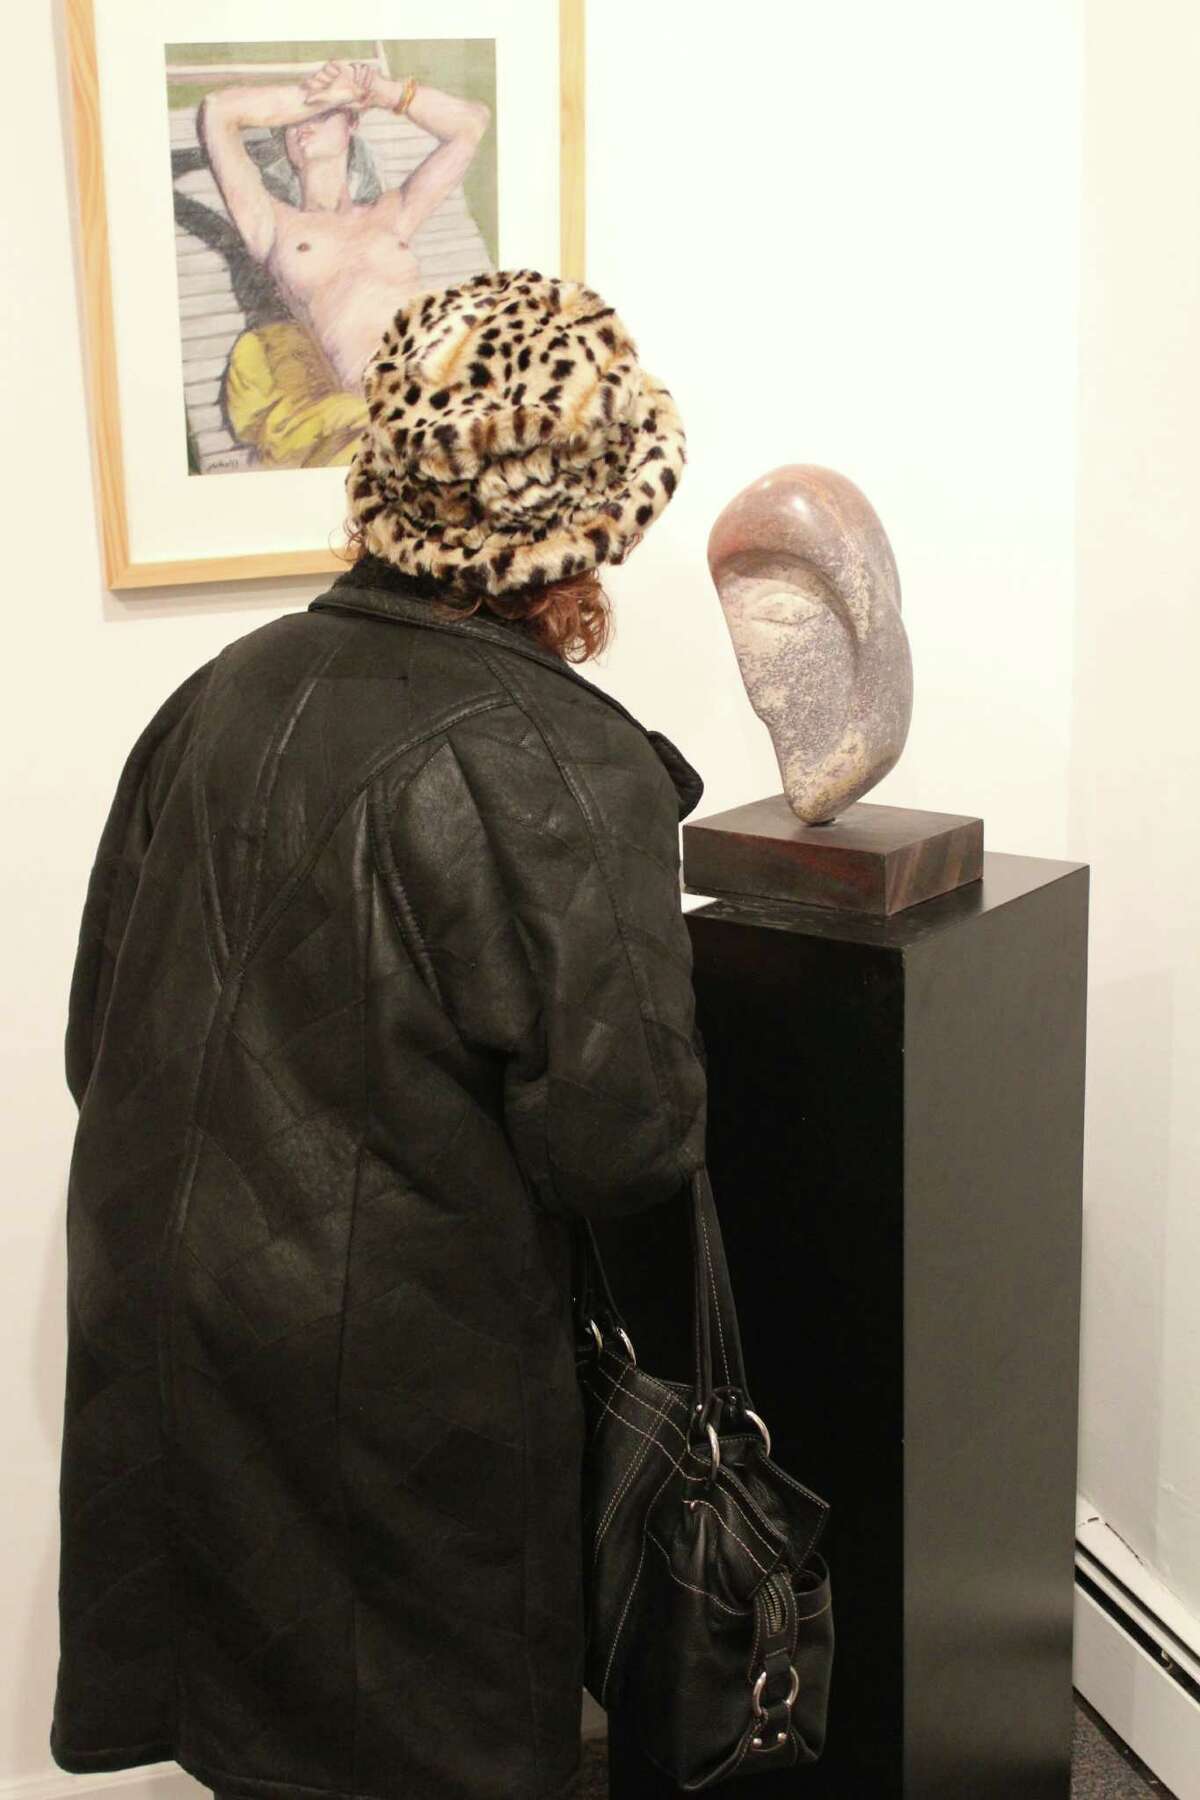 Were you SEEN at the Stamford Art Association's “Faces and Figures” exhibit opening reception on Jan. 12, 2014?